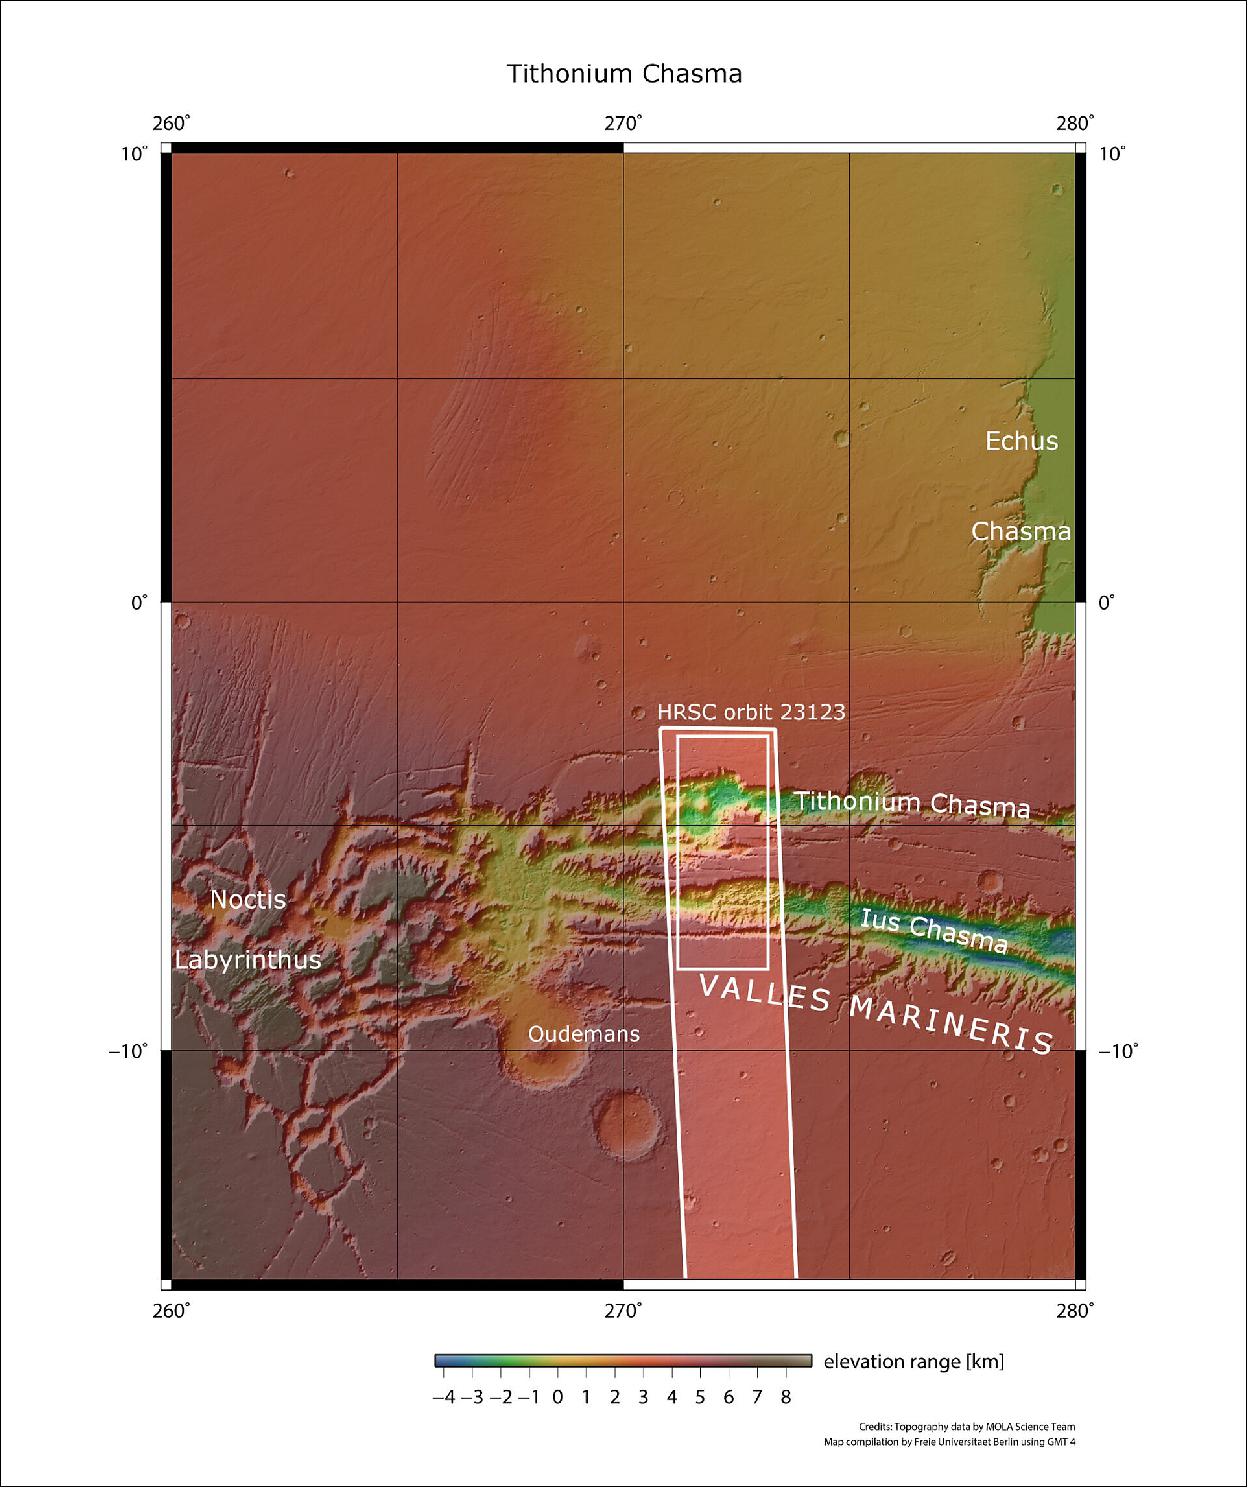 Figure 7: This image from ESA’s Mars Express shows Ius and Tithonium Chasmata, which form part of Mars’ Valles Marineris canyon structure. The area outlined by the bold white box indicates the area imaged by the Mars Express High Resolution Stereo Camera on 21 April 2022 during orbit 23123 (image credit: NASA/MGS/MOLA Science Team)